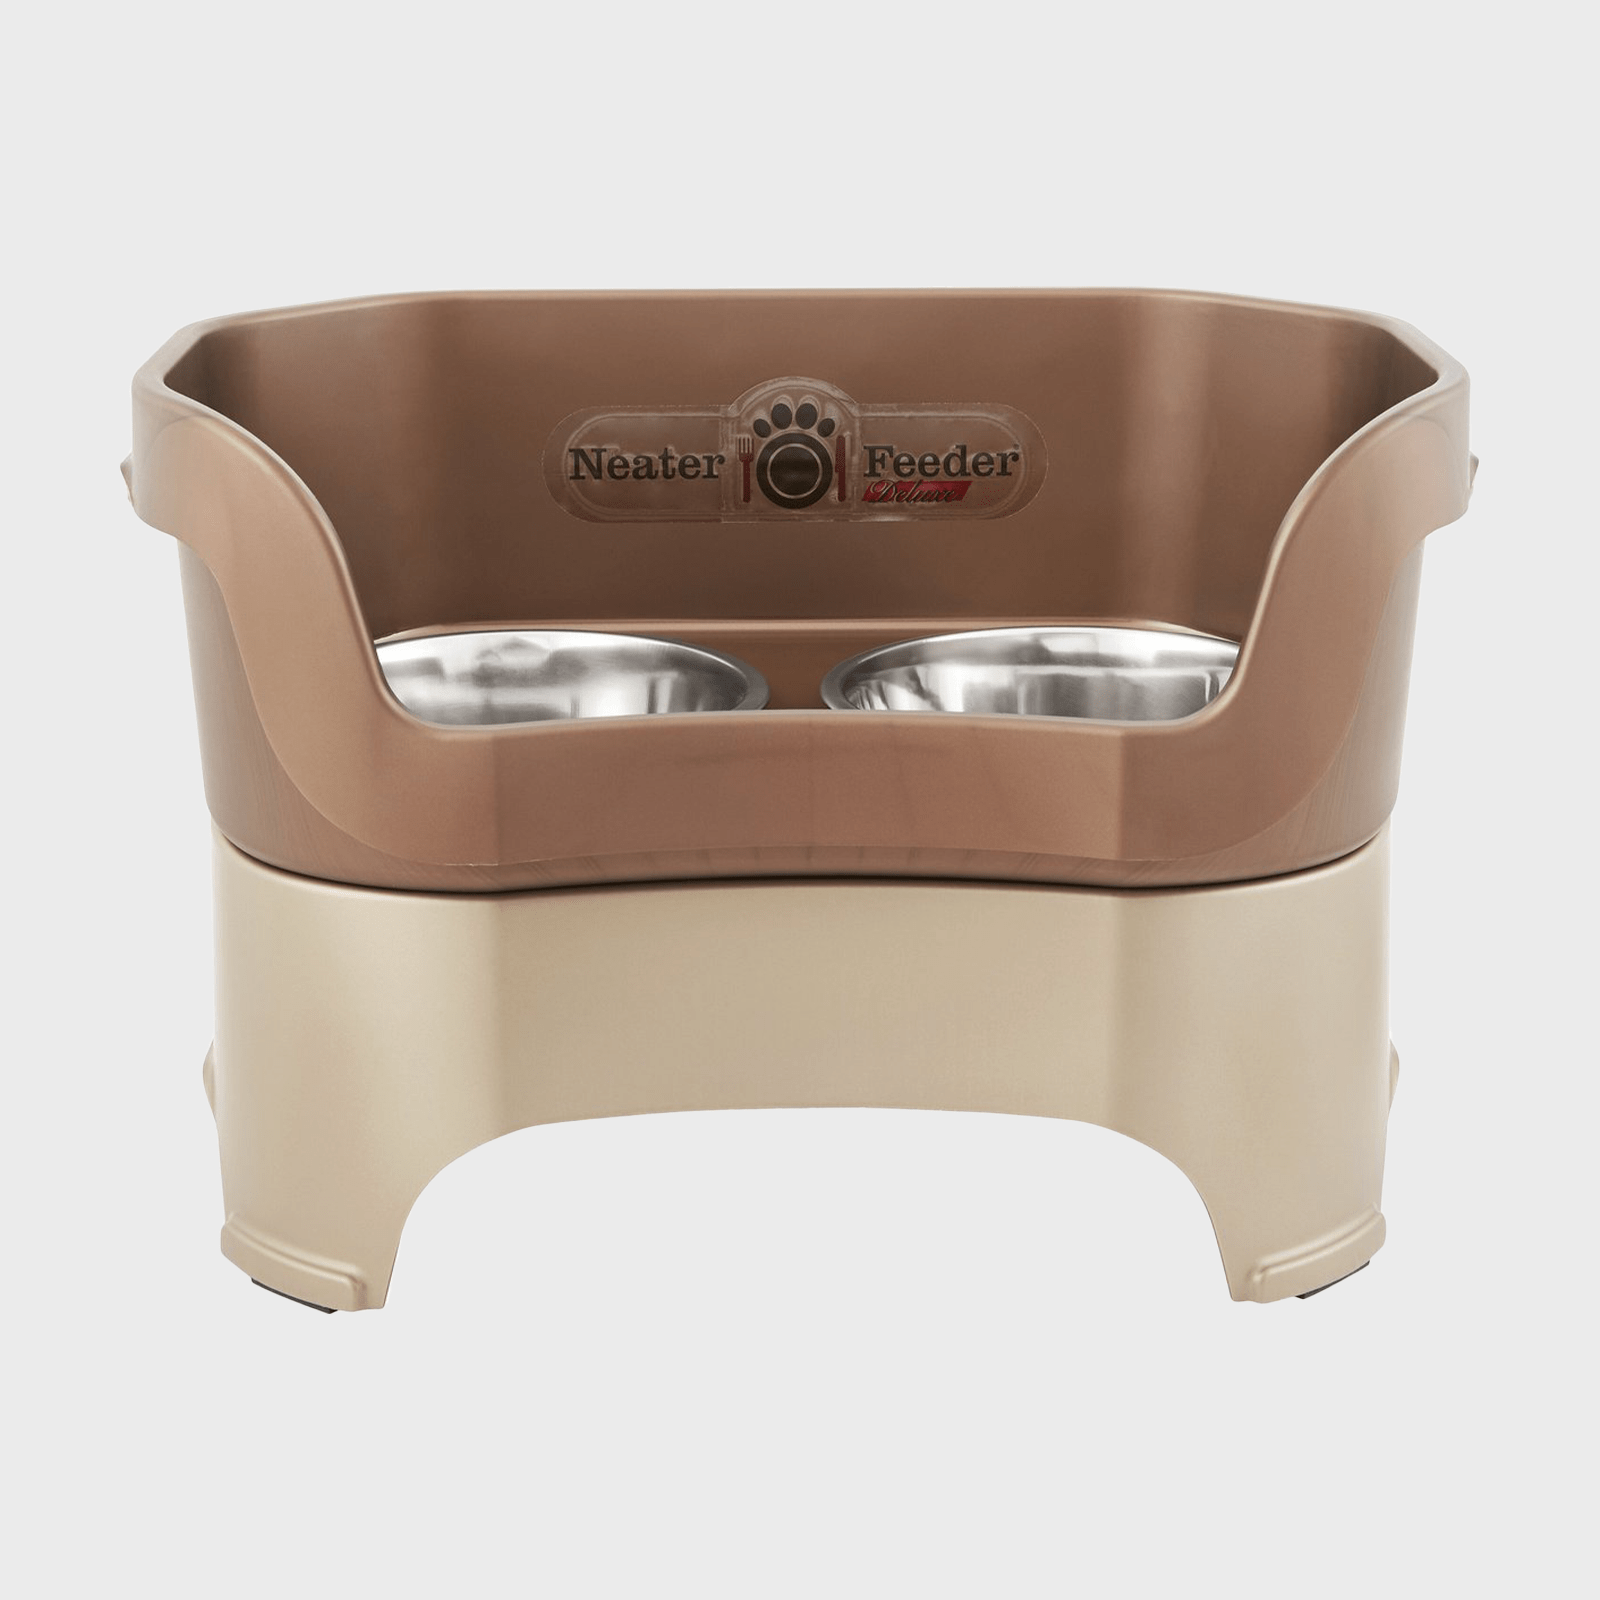 Heavy Dog Bowls That Can't Be Moved